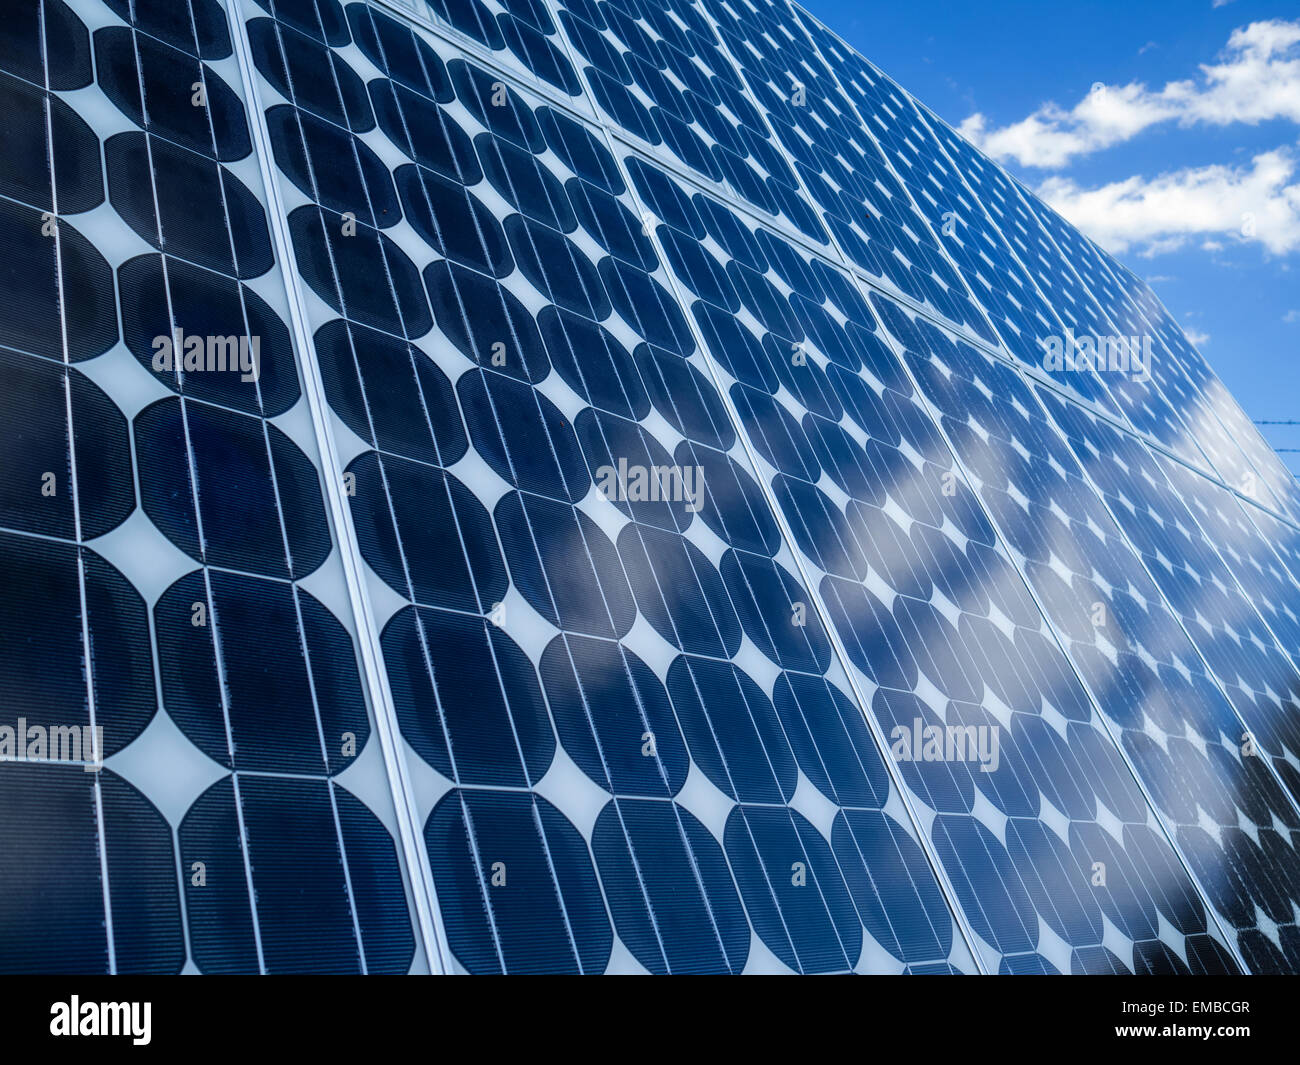 Photovoltaic cell array blue sky with reflections of clouds in solar panels emphasizing environmentally friendly aspect of green renewable energy Stock Photo